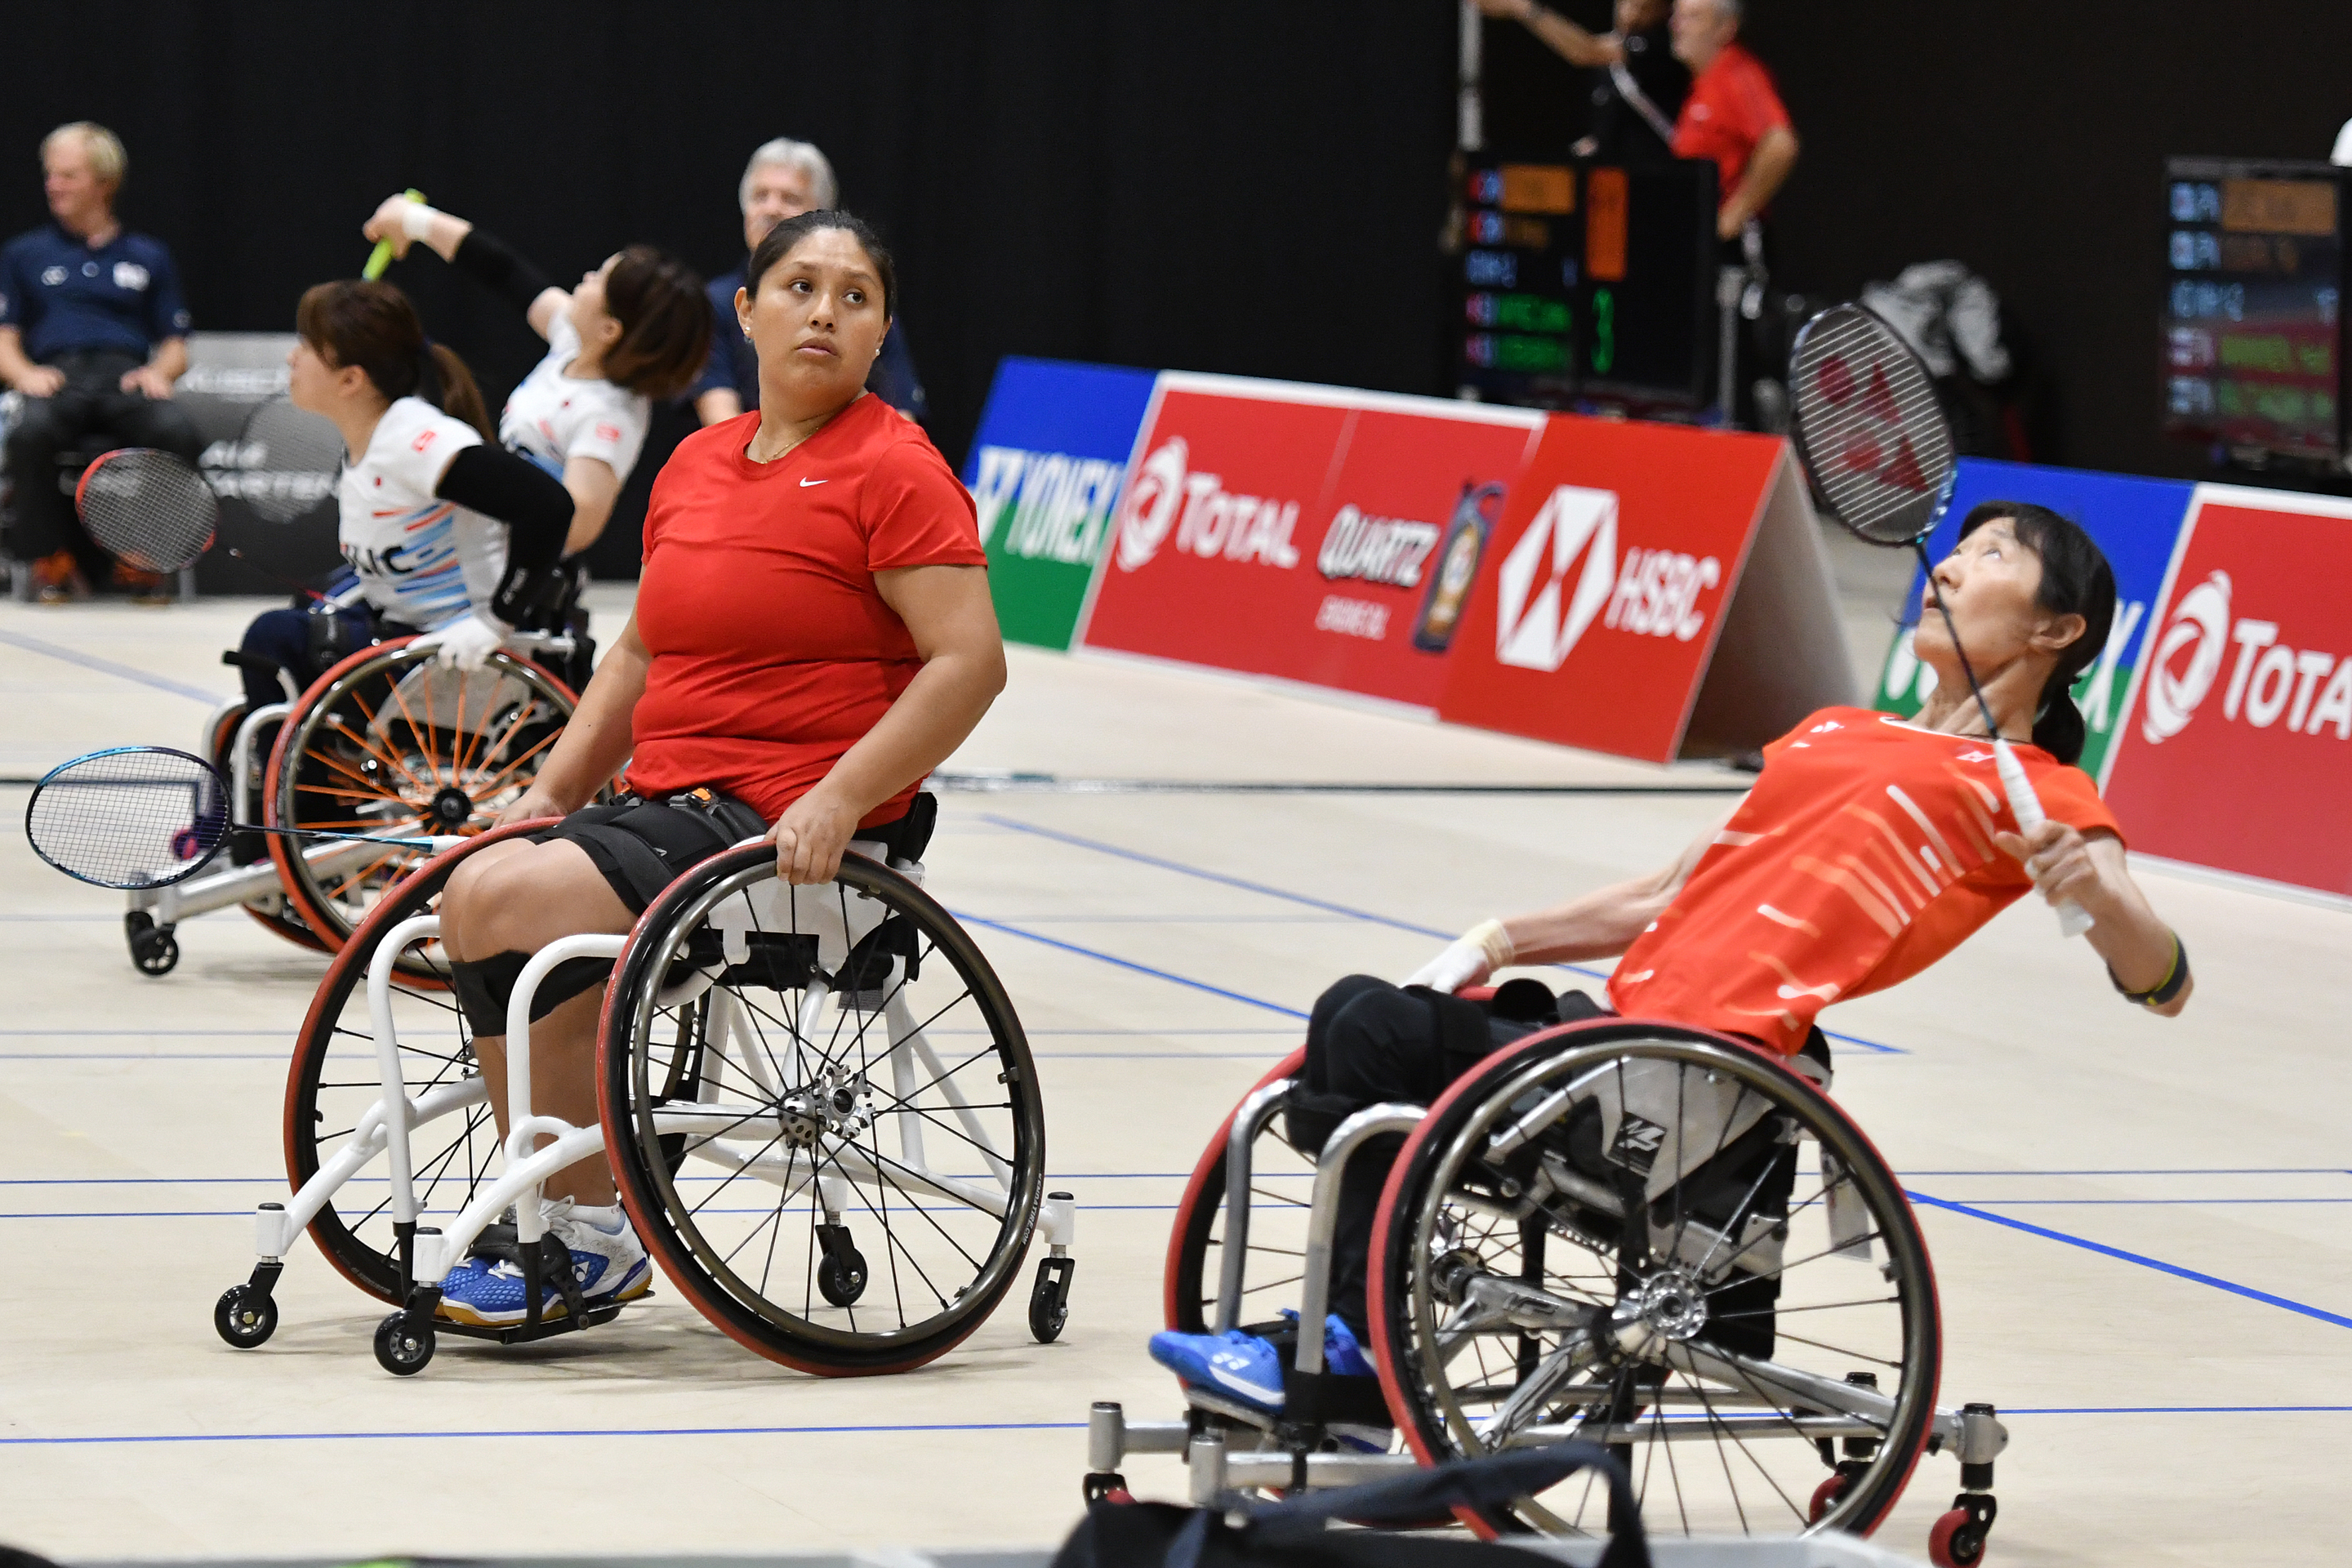 BWF ANNOUNCE HOSTS OF 2021 AND 2023 PARA BADMINTON WORLD CHAMPIONSHIPS